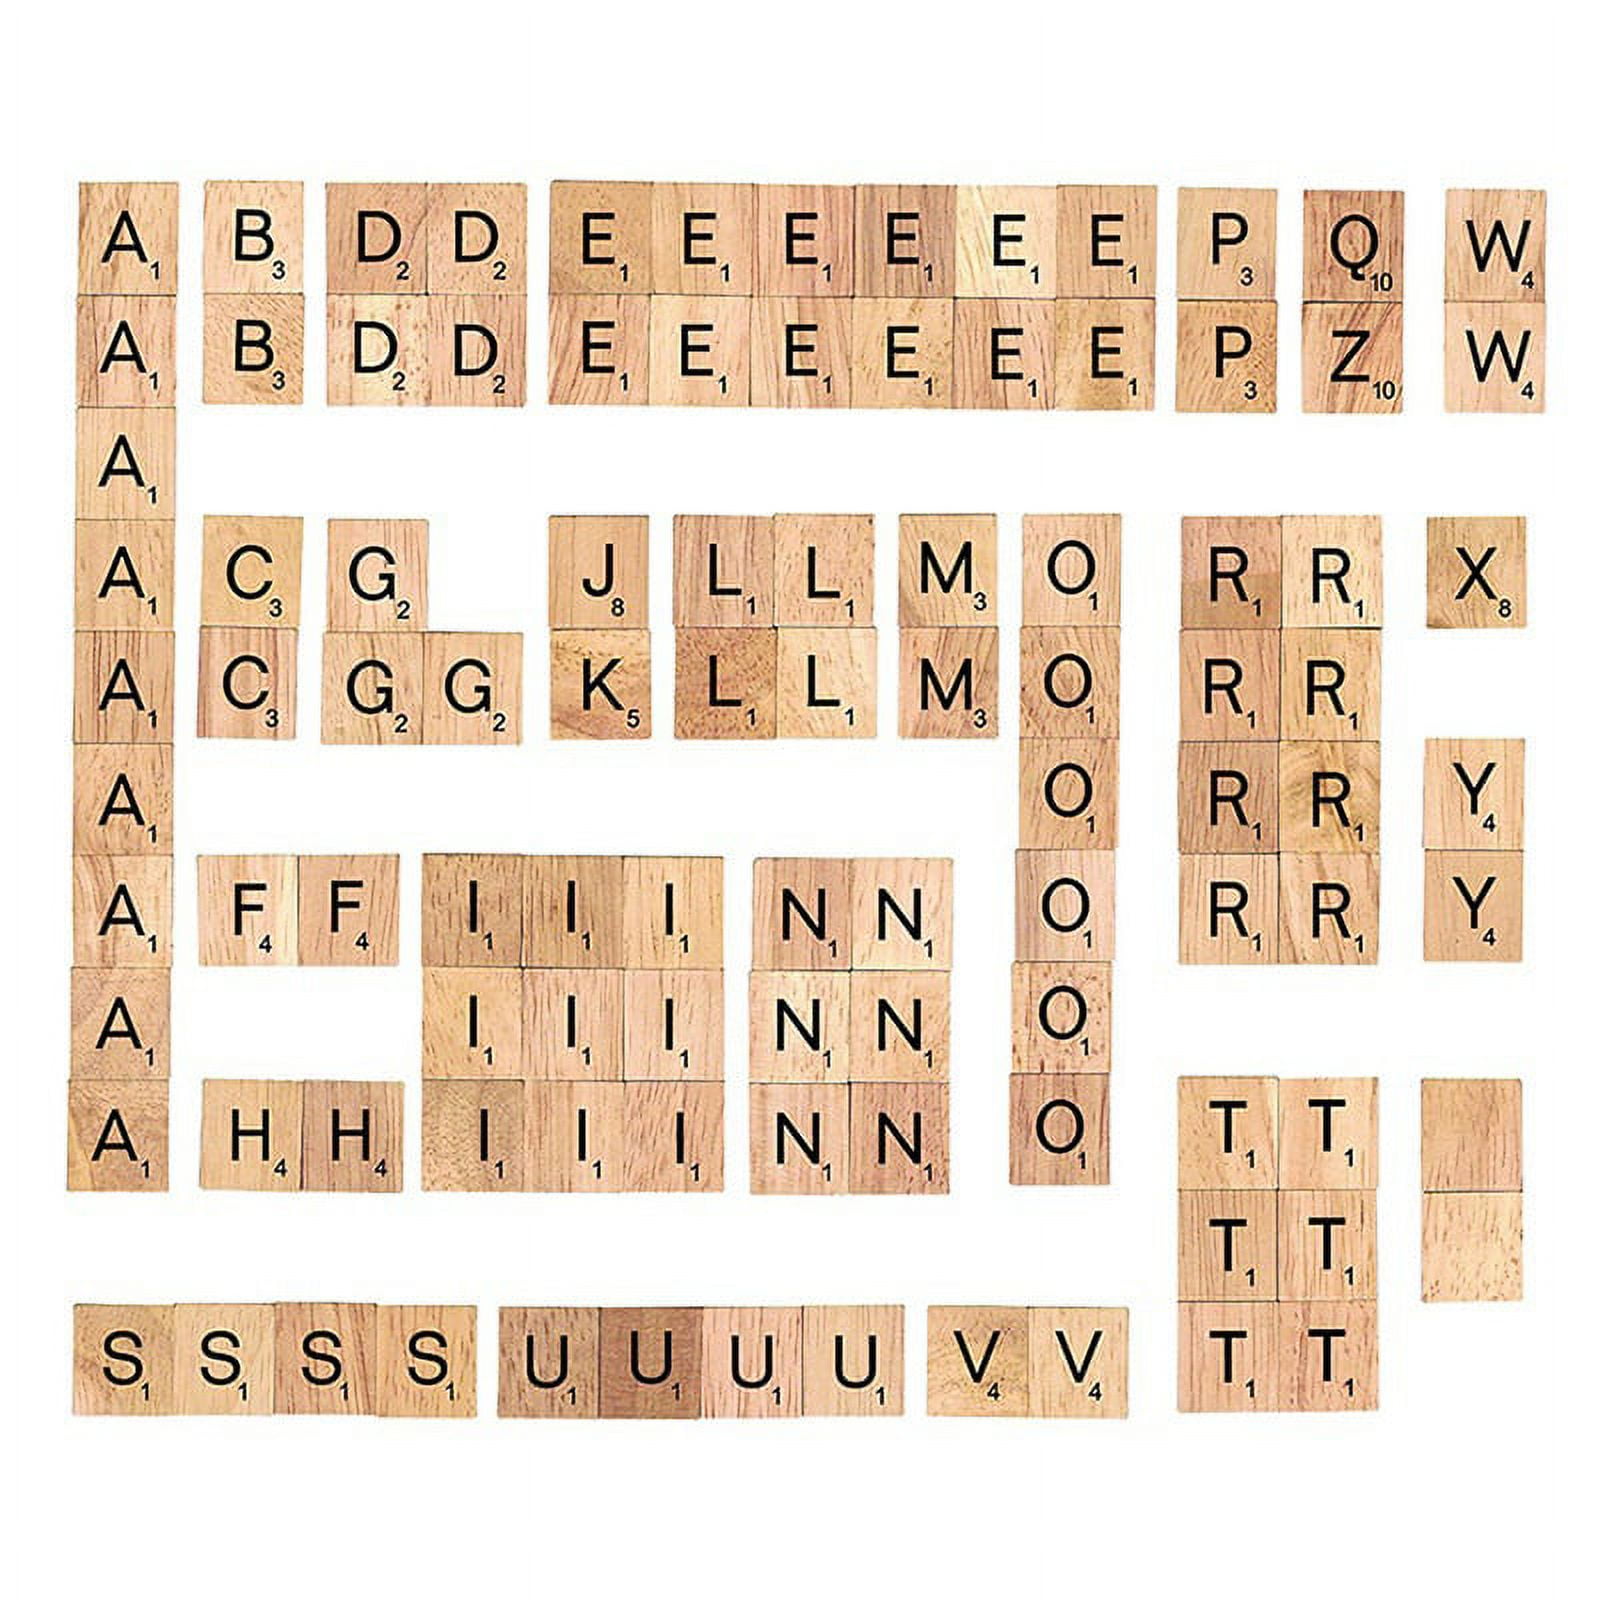 100 Letter Wooden Box For Crafts And Scrabble Wooden Tiles Price Black  Letters And Numbers From Topwholesalerno1, $7.89